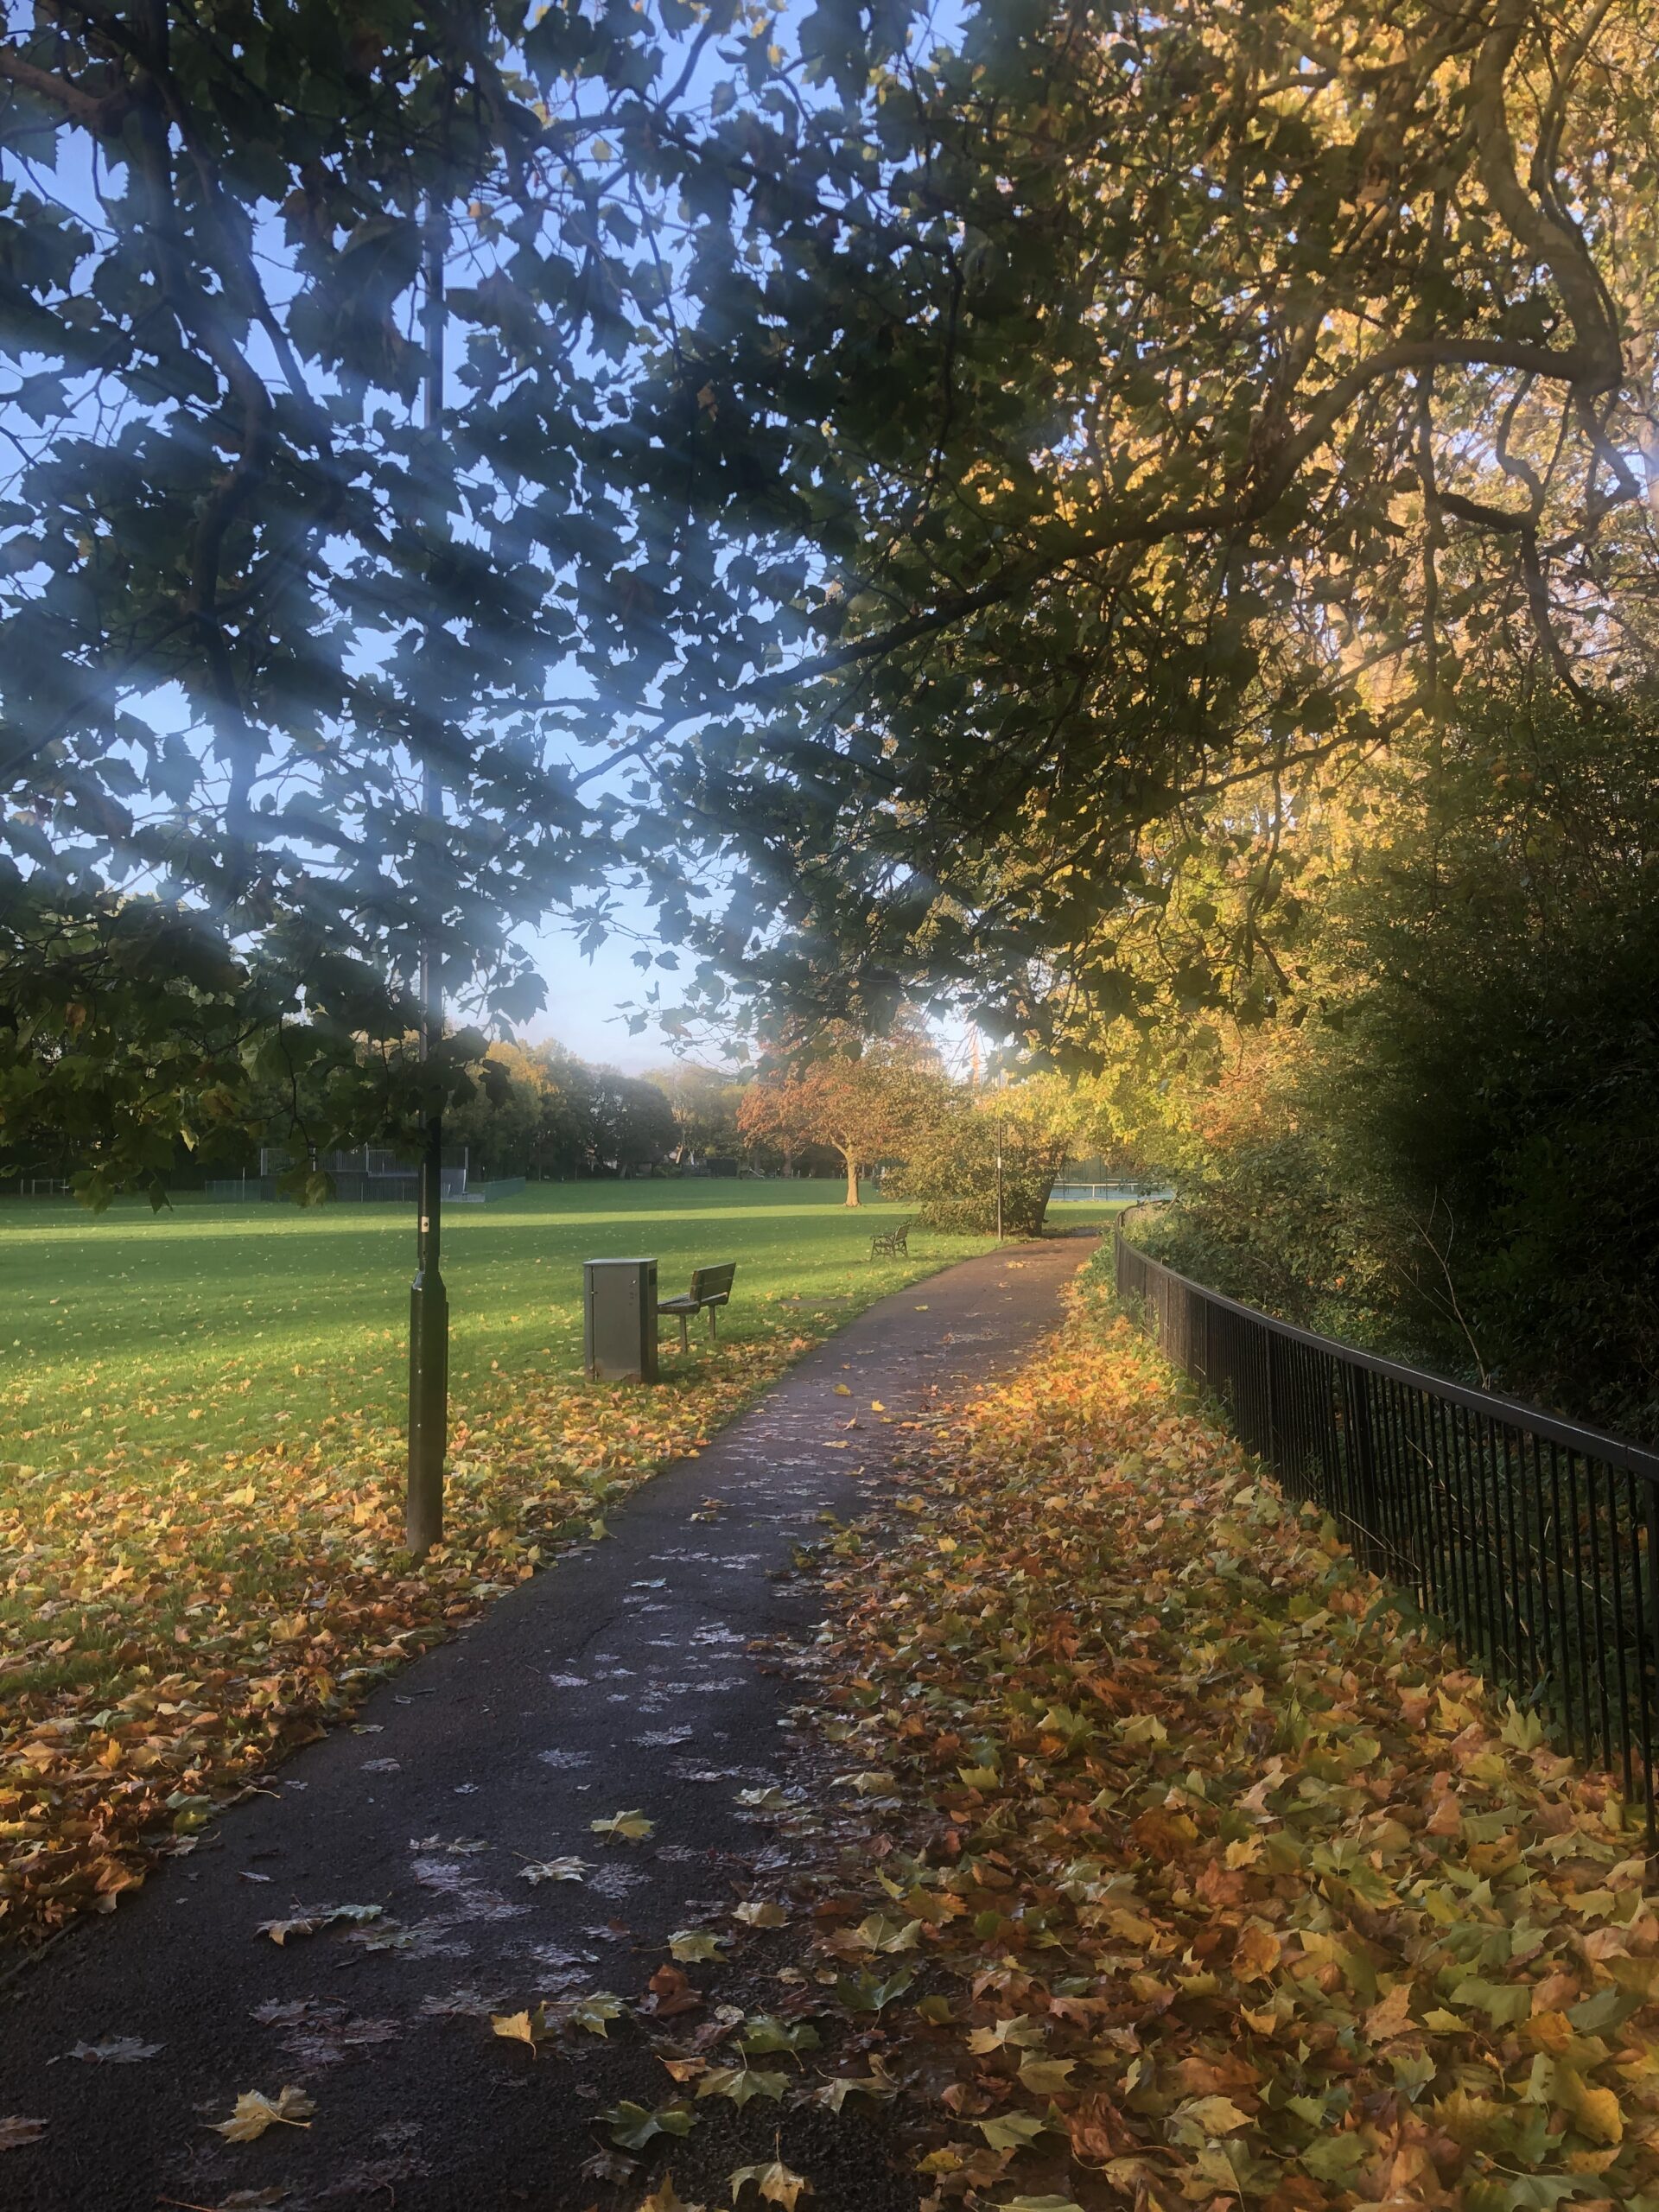 Coloured leaves on the ground by a path, with a tree and blue sky